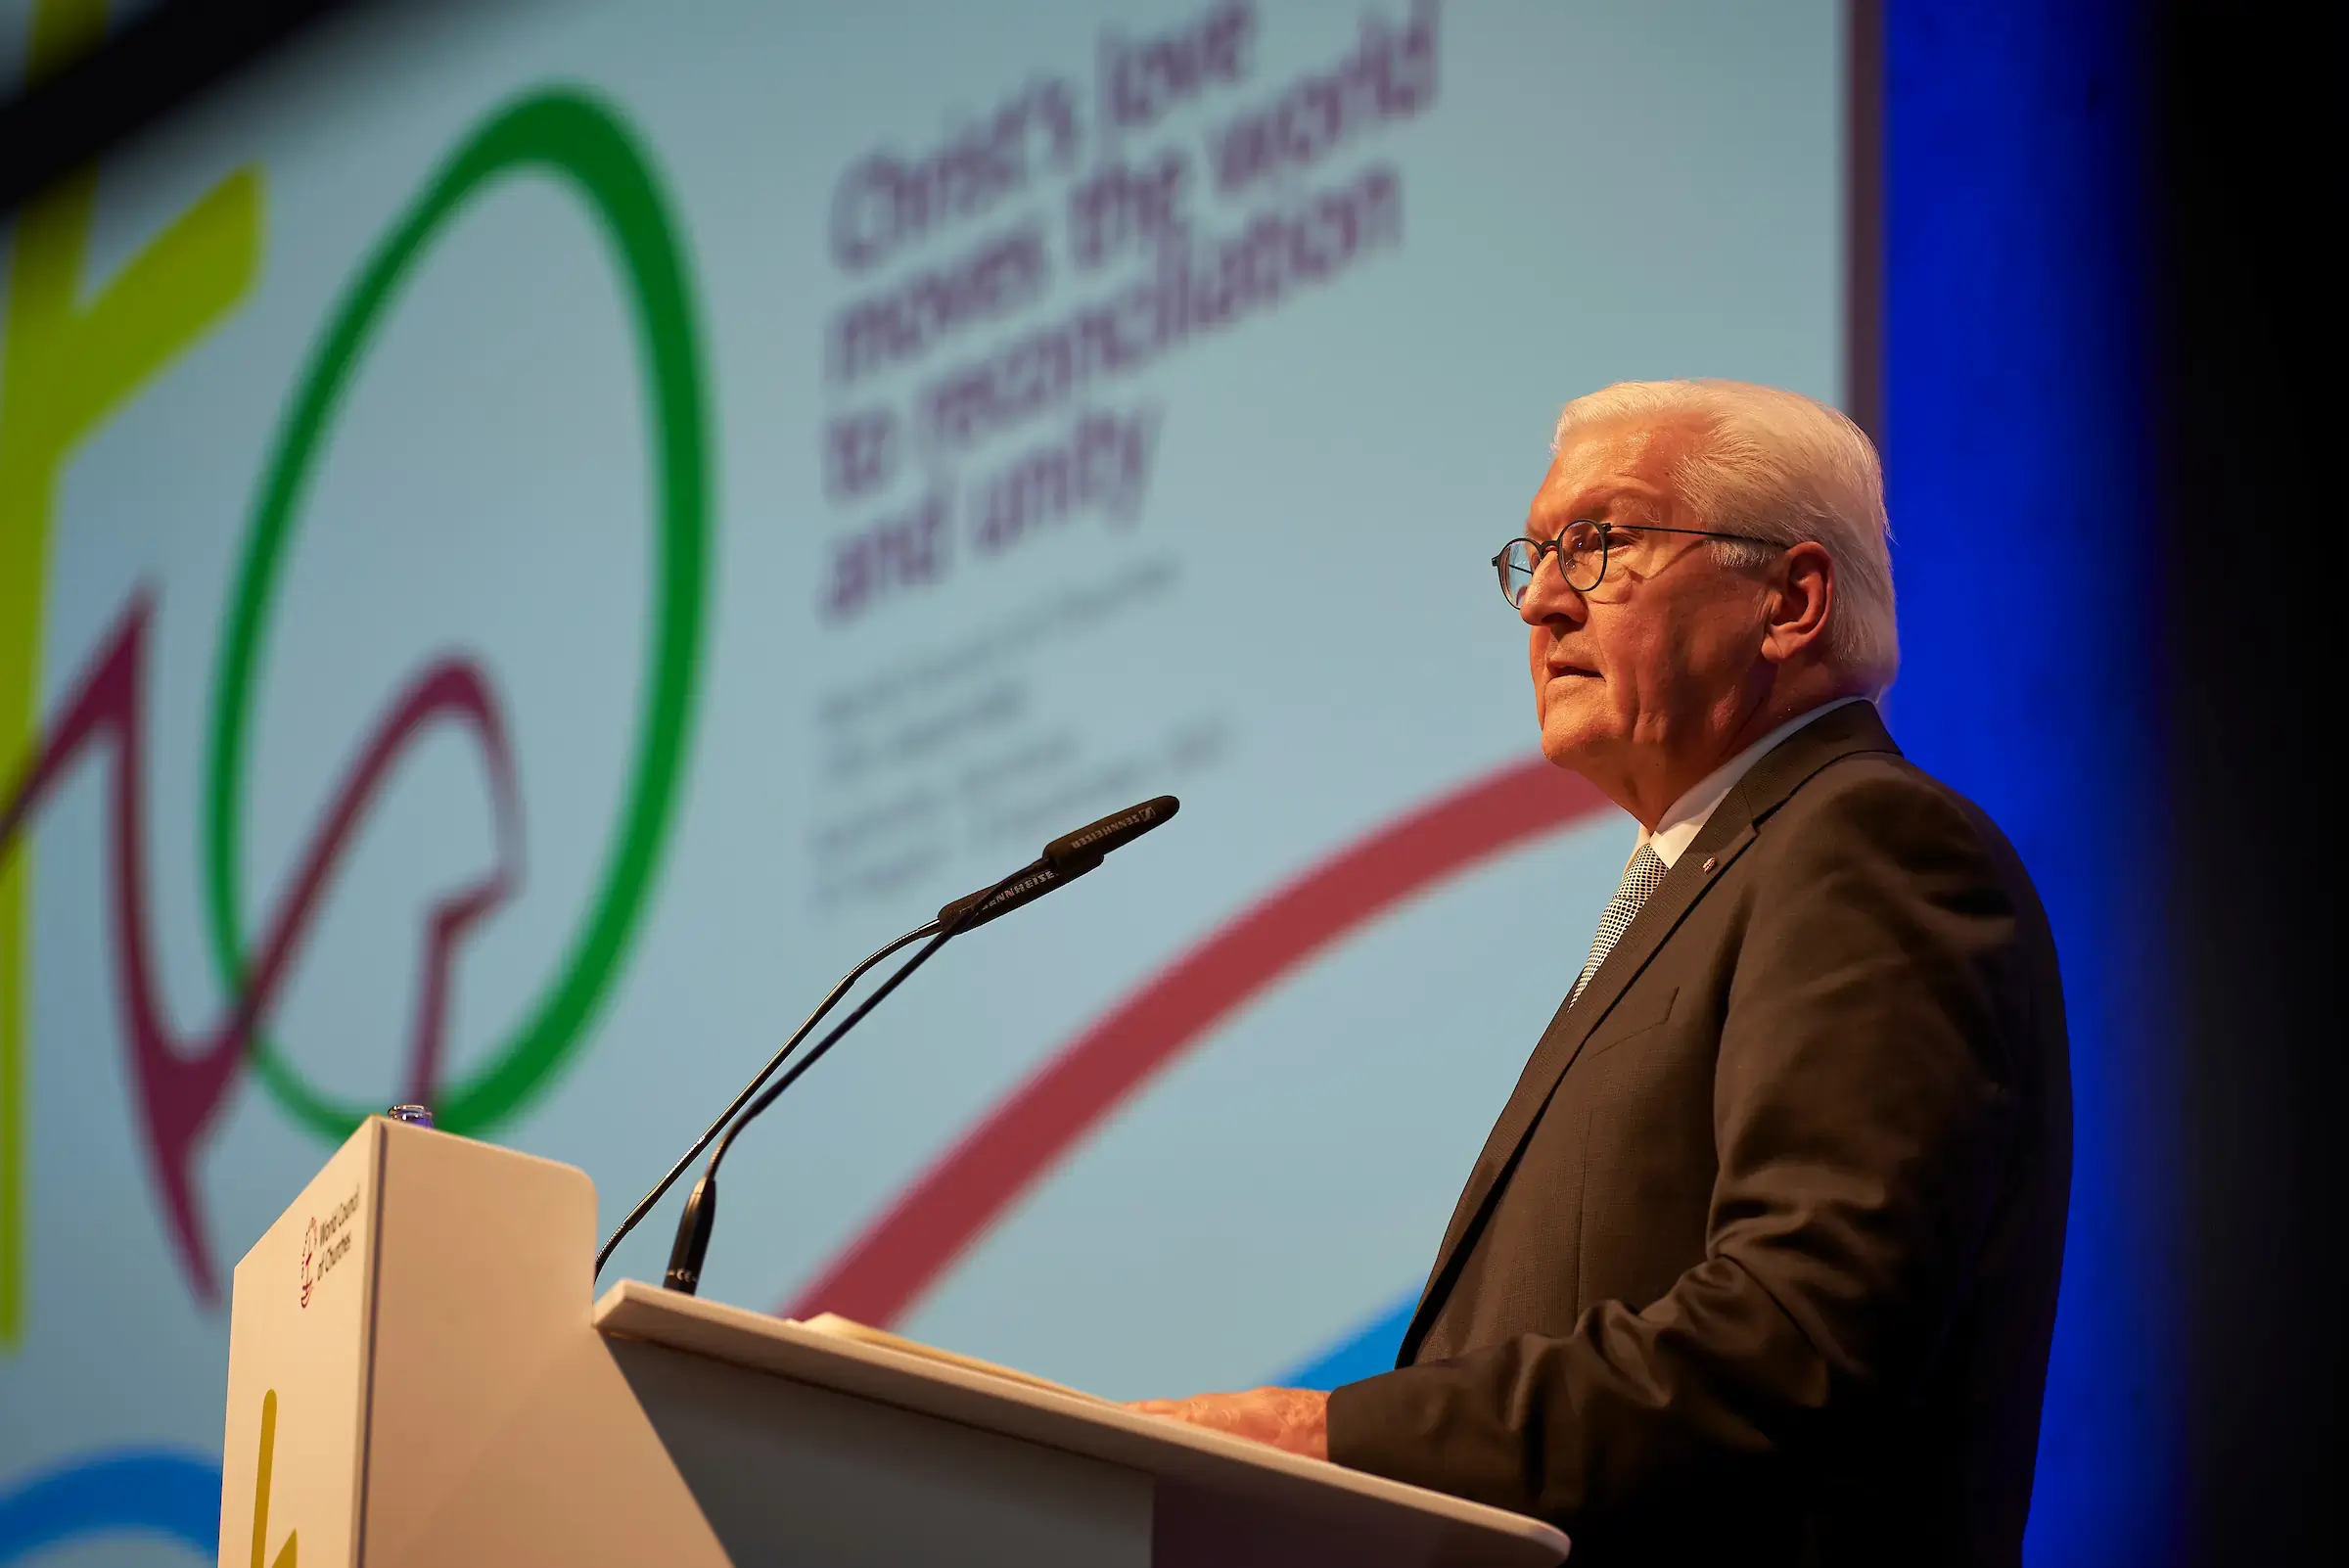 German President Frank Walter Steinmeier addresses the 11th Assembly of the World Council of Churches, meeting in Europe for the first time since 1968